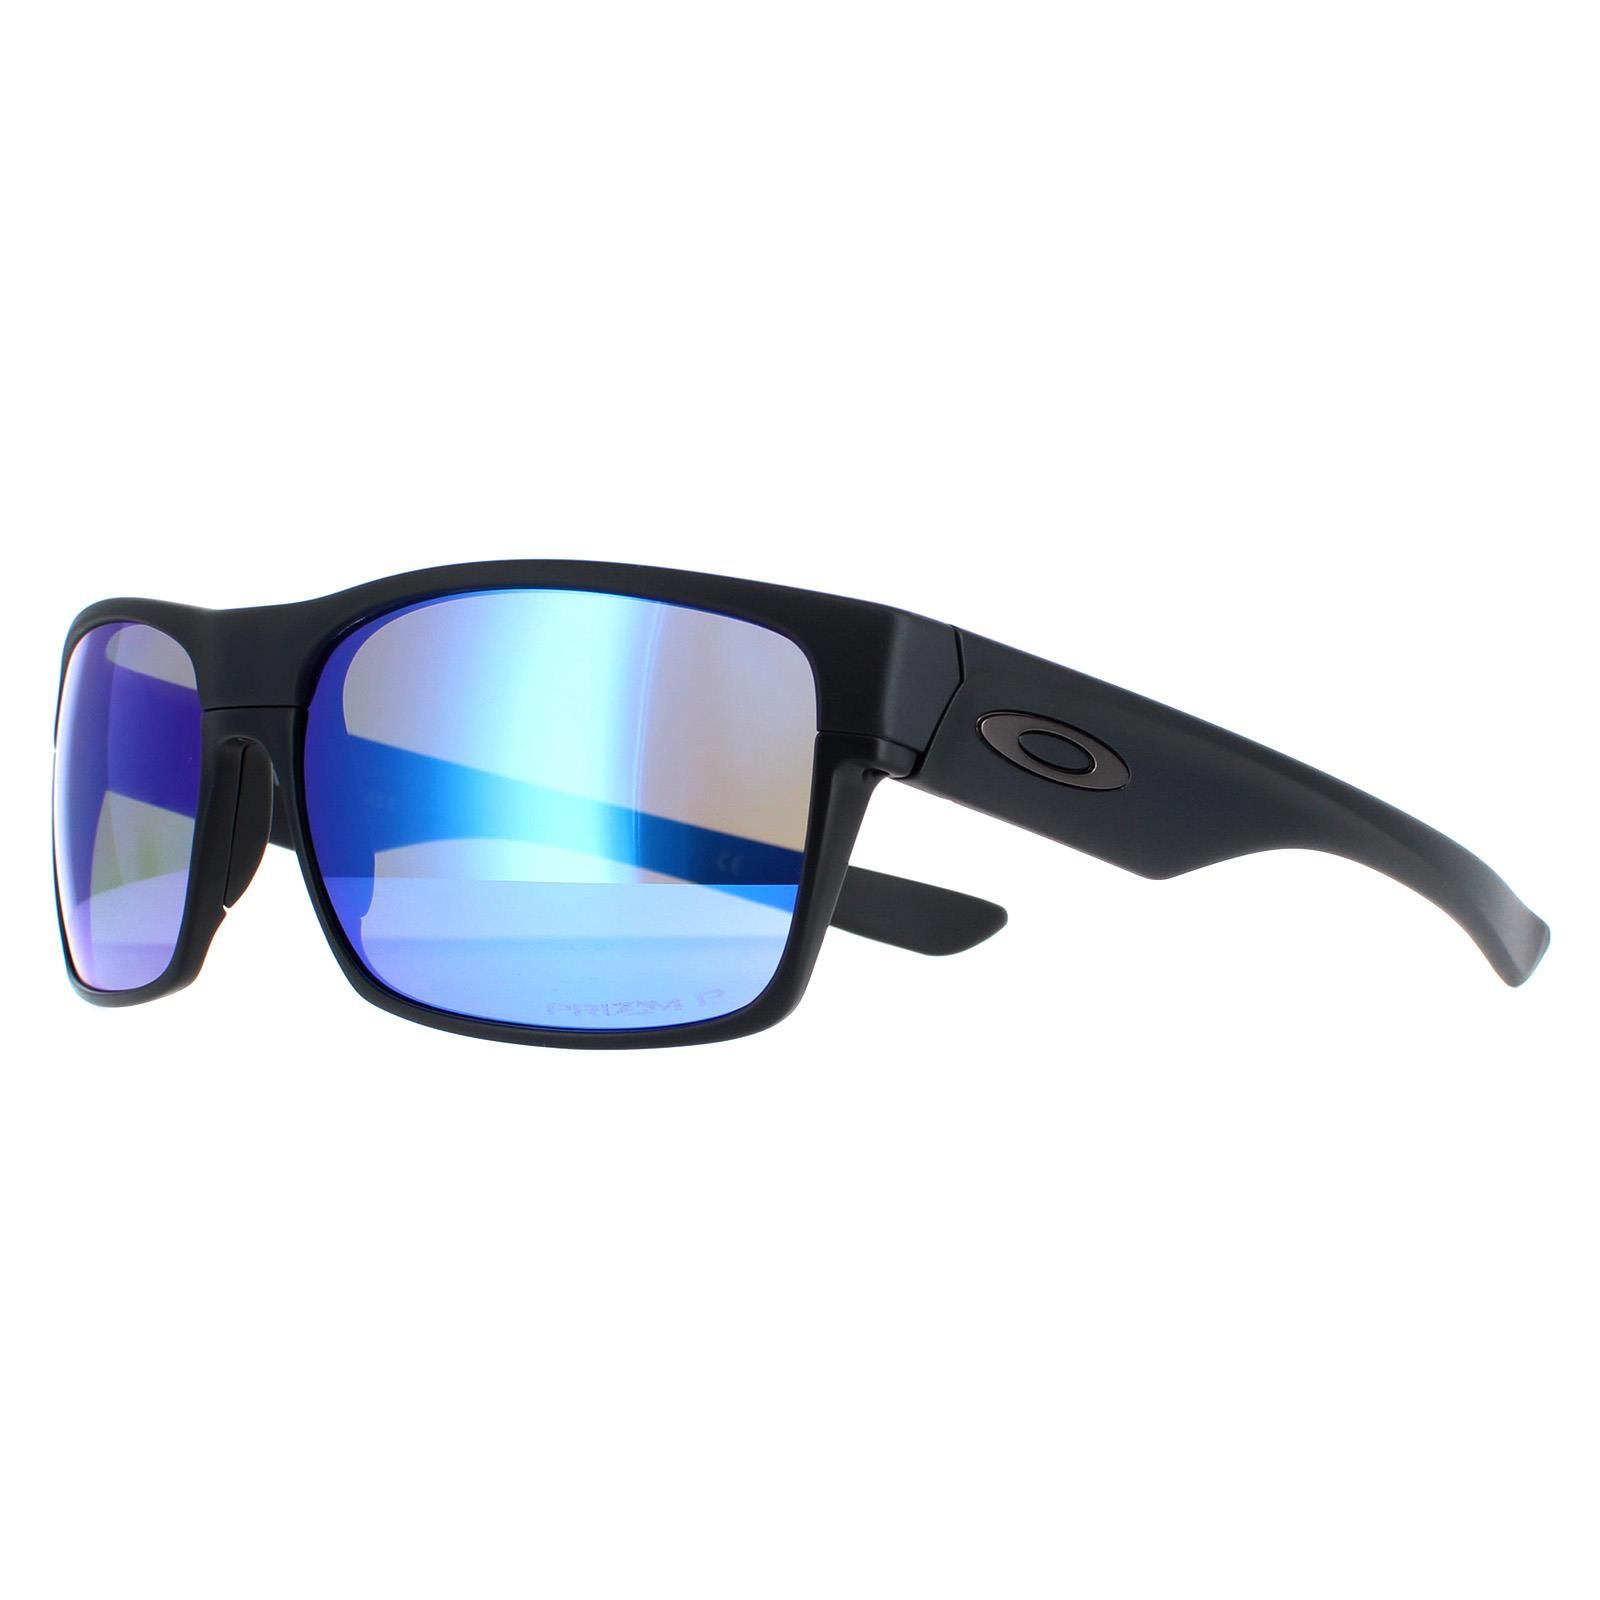 Oakley Rectangle Mens Matte Black Prizm Sapphire Polarized  TwoFace  Sunglasses literally a two-tone frame with an aluminium lower frame and O Matter upper frame. Classic styling and the usual quality lenses from Oakley combine to give a winning pair of ultra modern sunglasses.